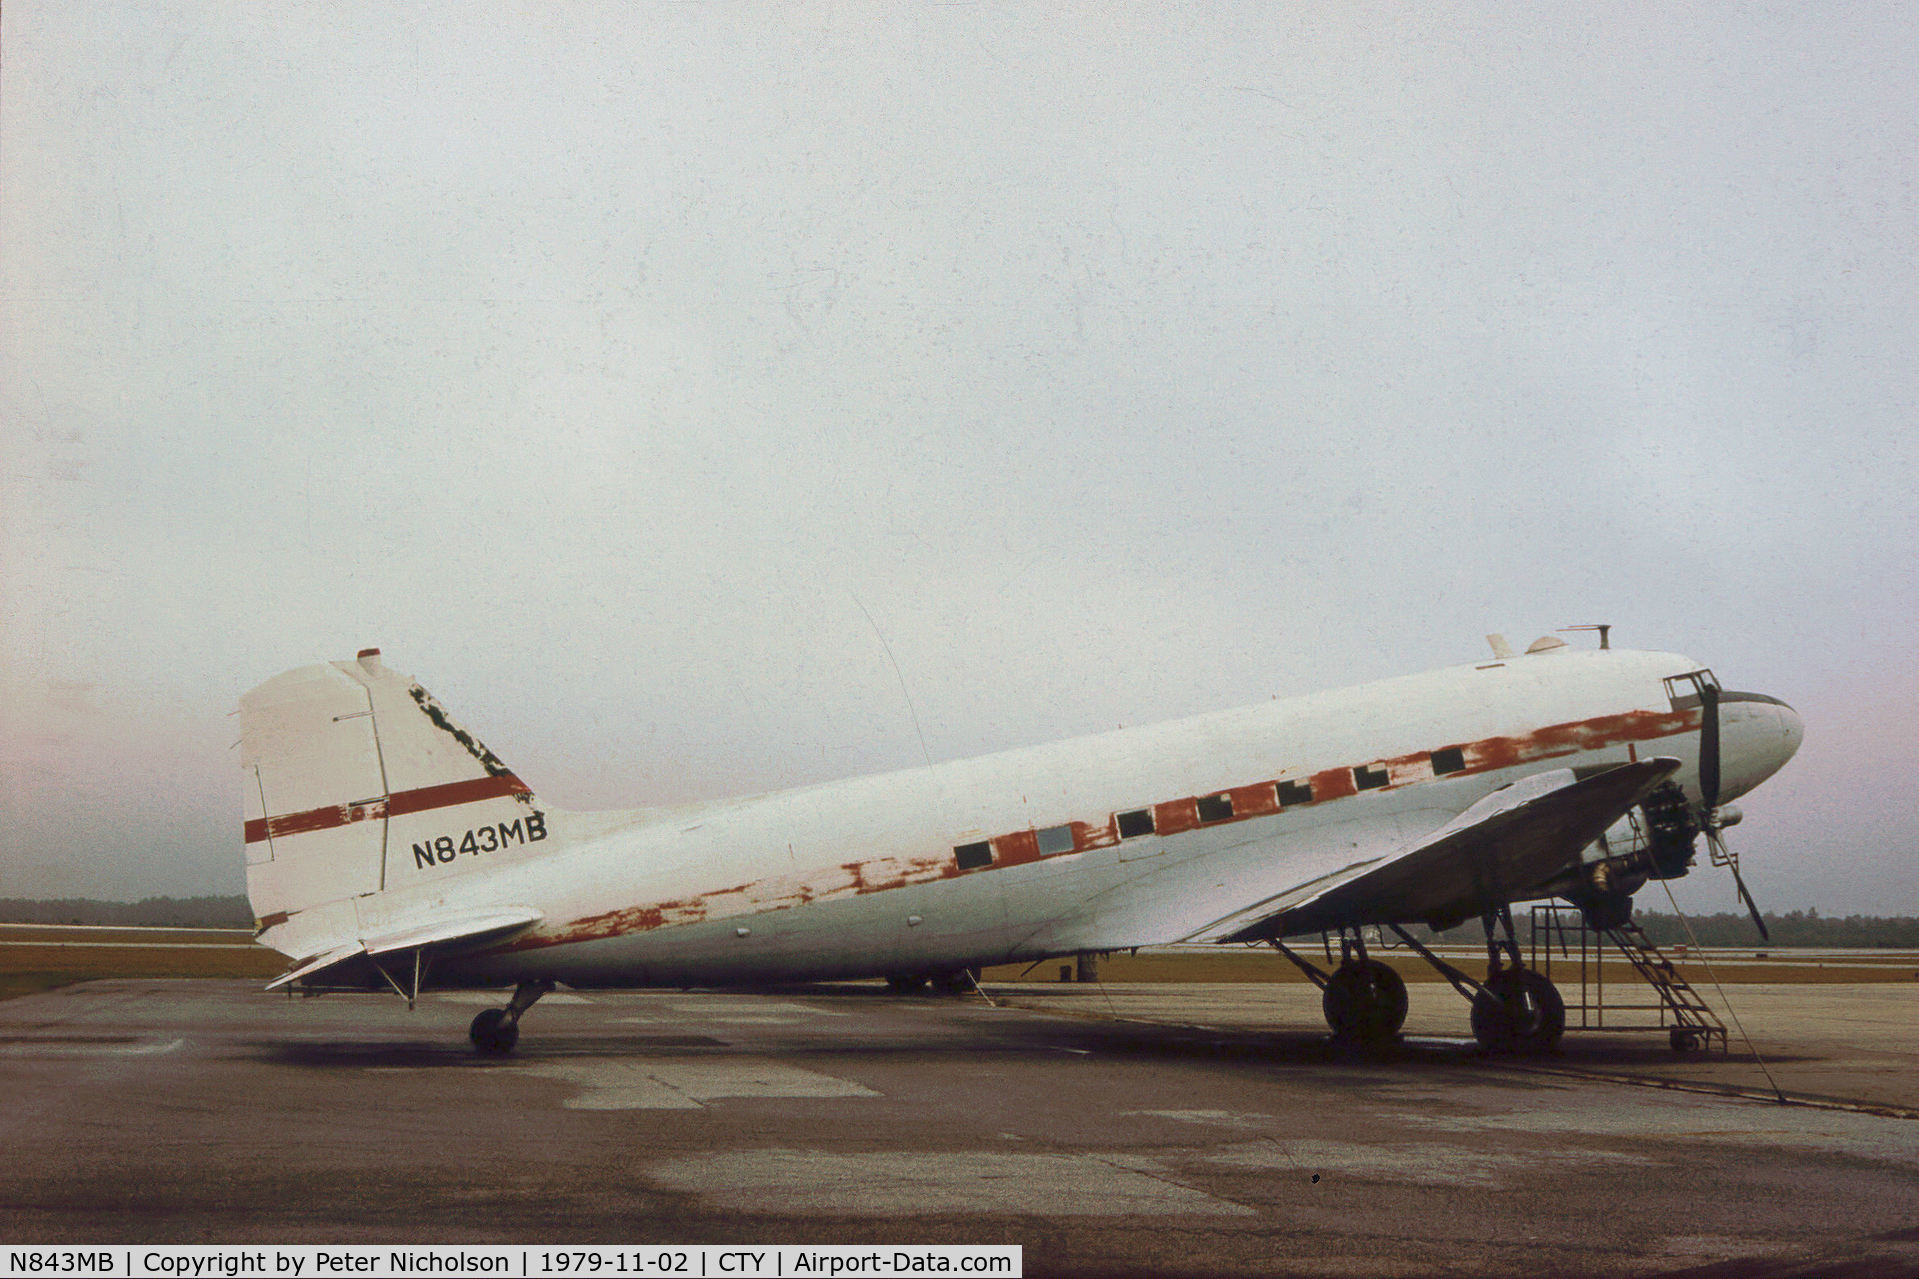 N843MB, 1942 Douglas DC-3 C/N 17218, This DC-3 of Mosquito Control was seen at Panama City Airport in November 1979.